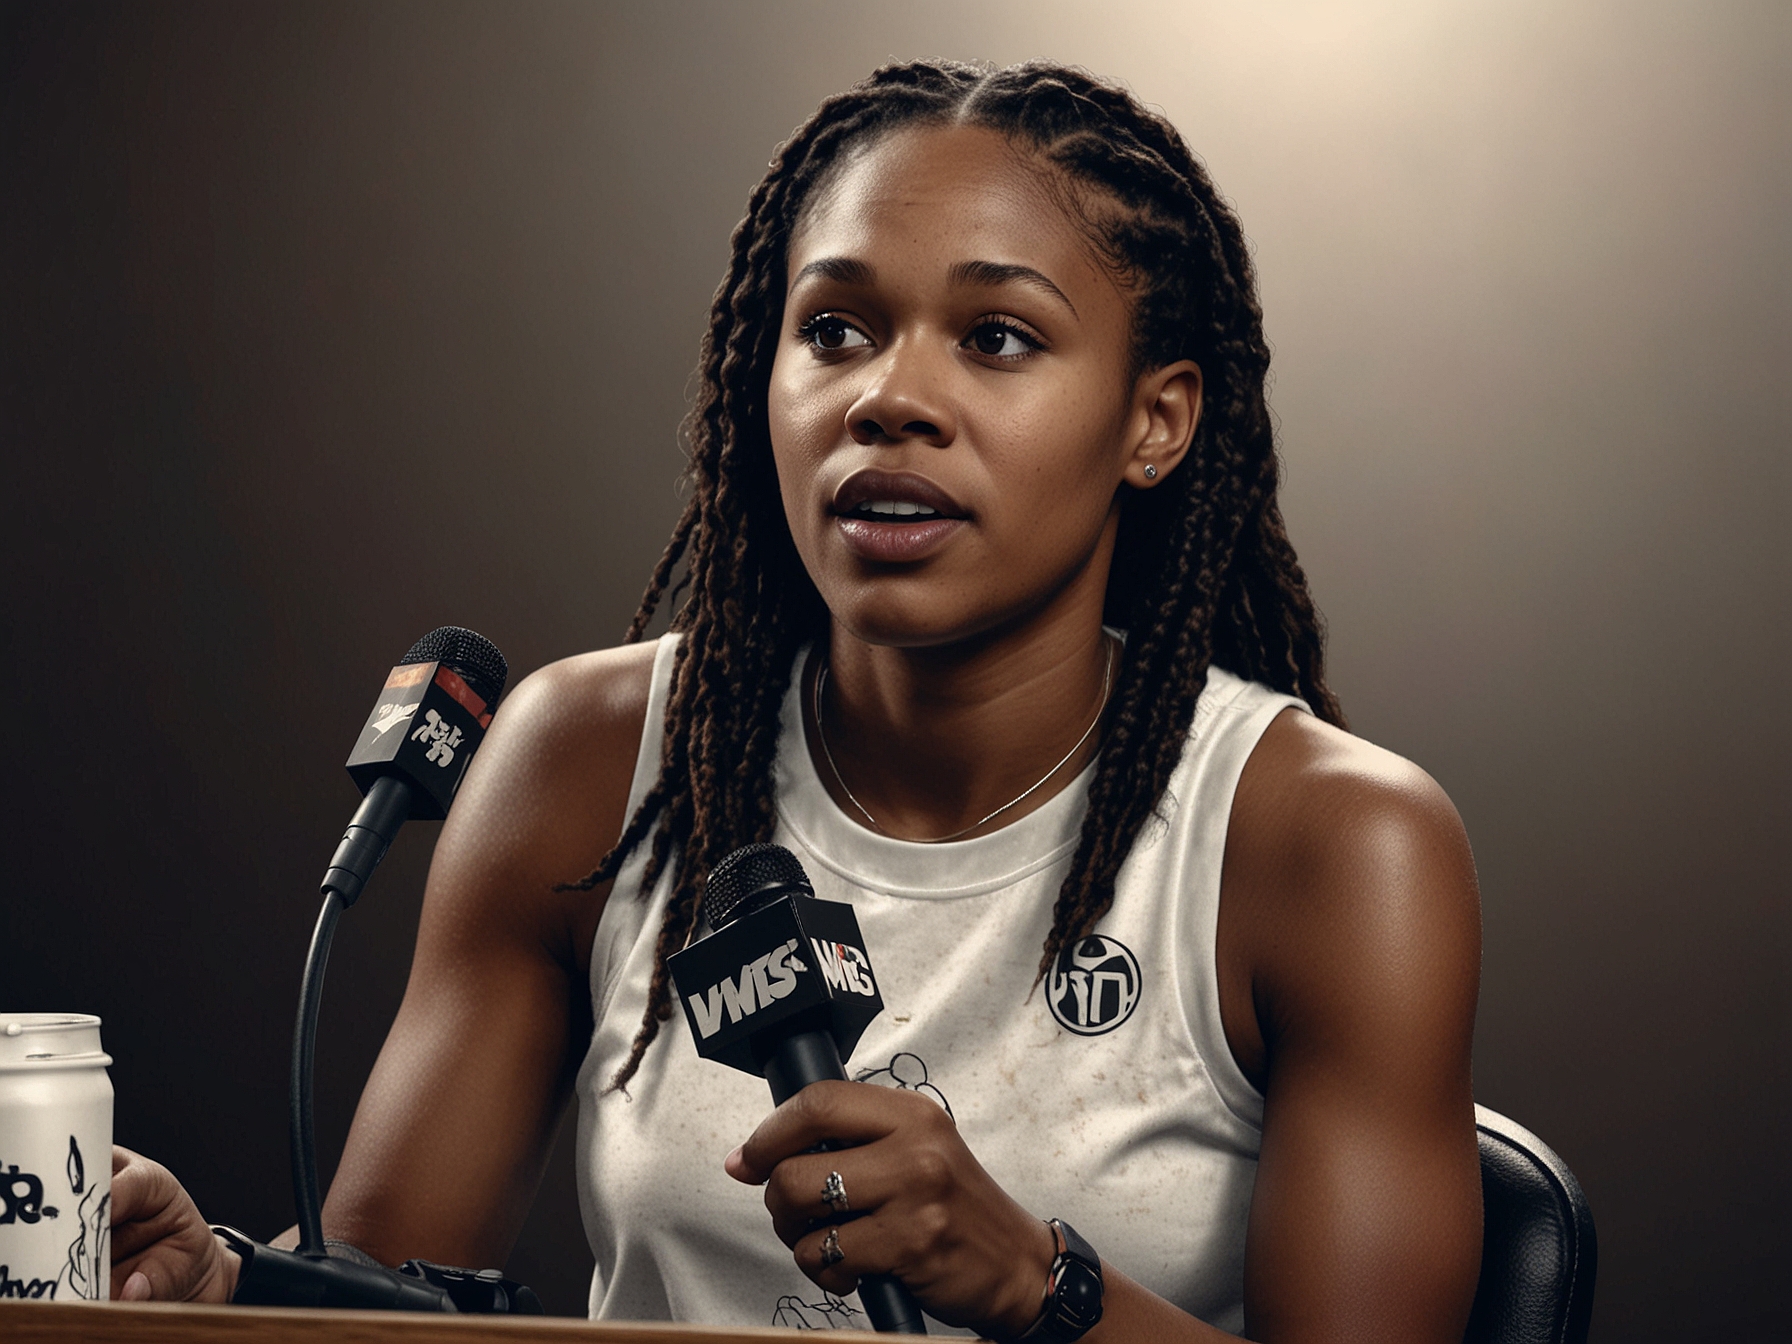 Angel Reese addressing the press after a WNBA game, showing her candid and grounded side as she speaks about her personal and professional growth.